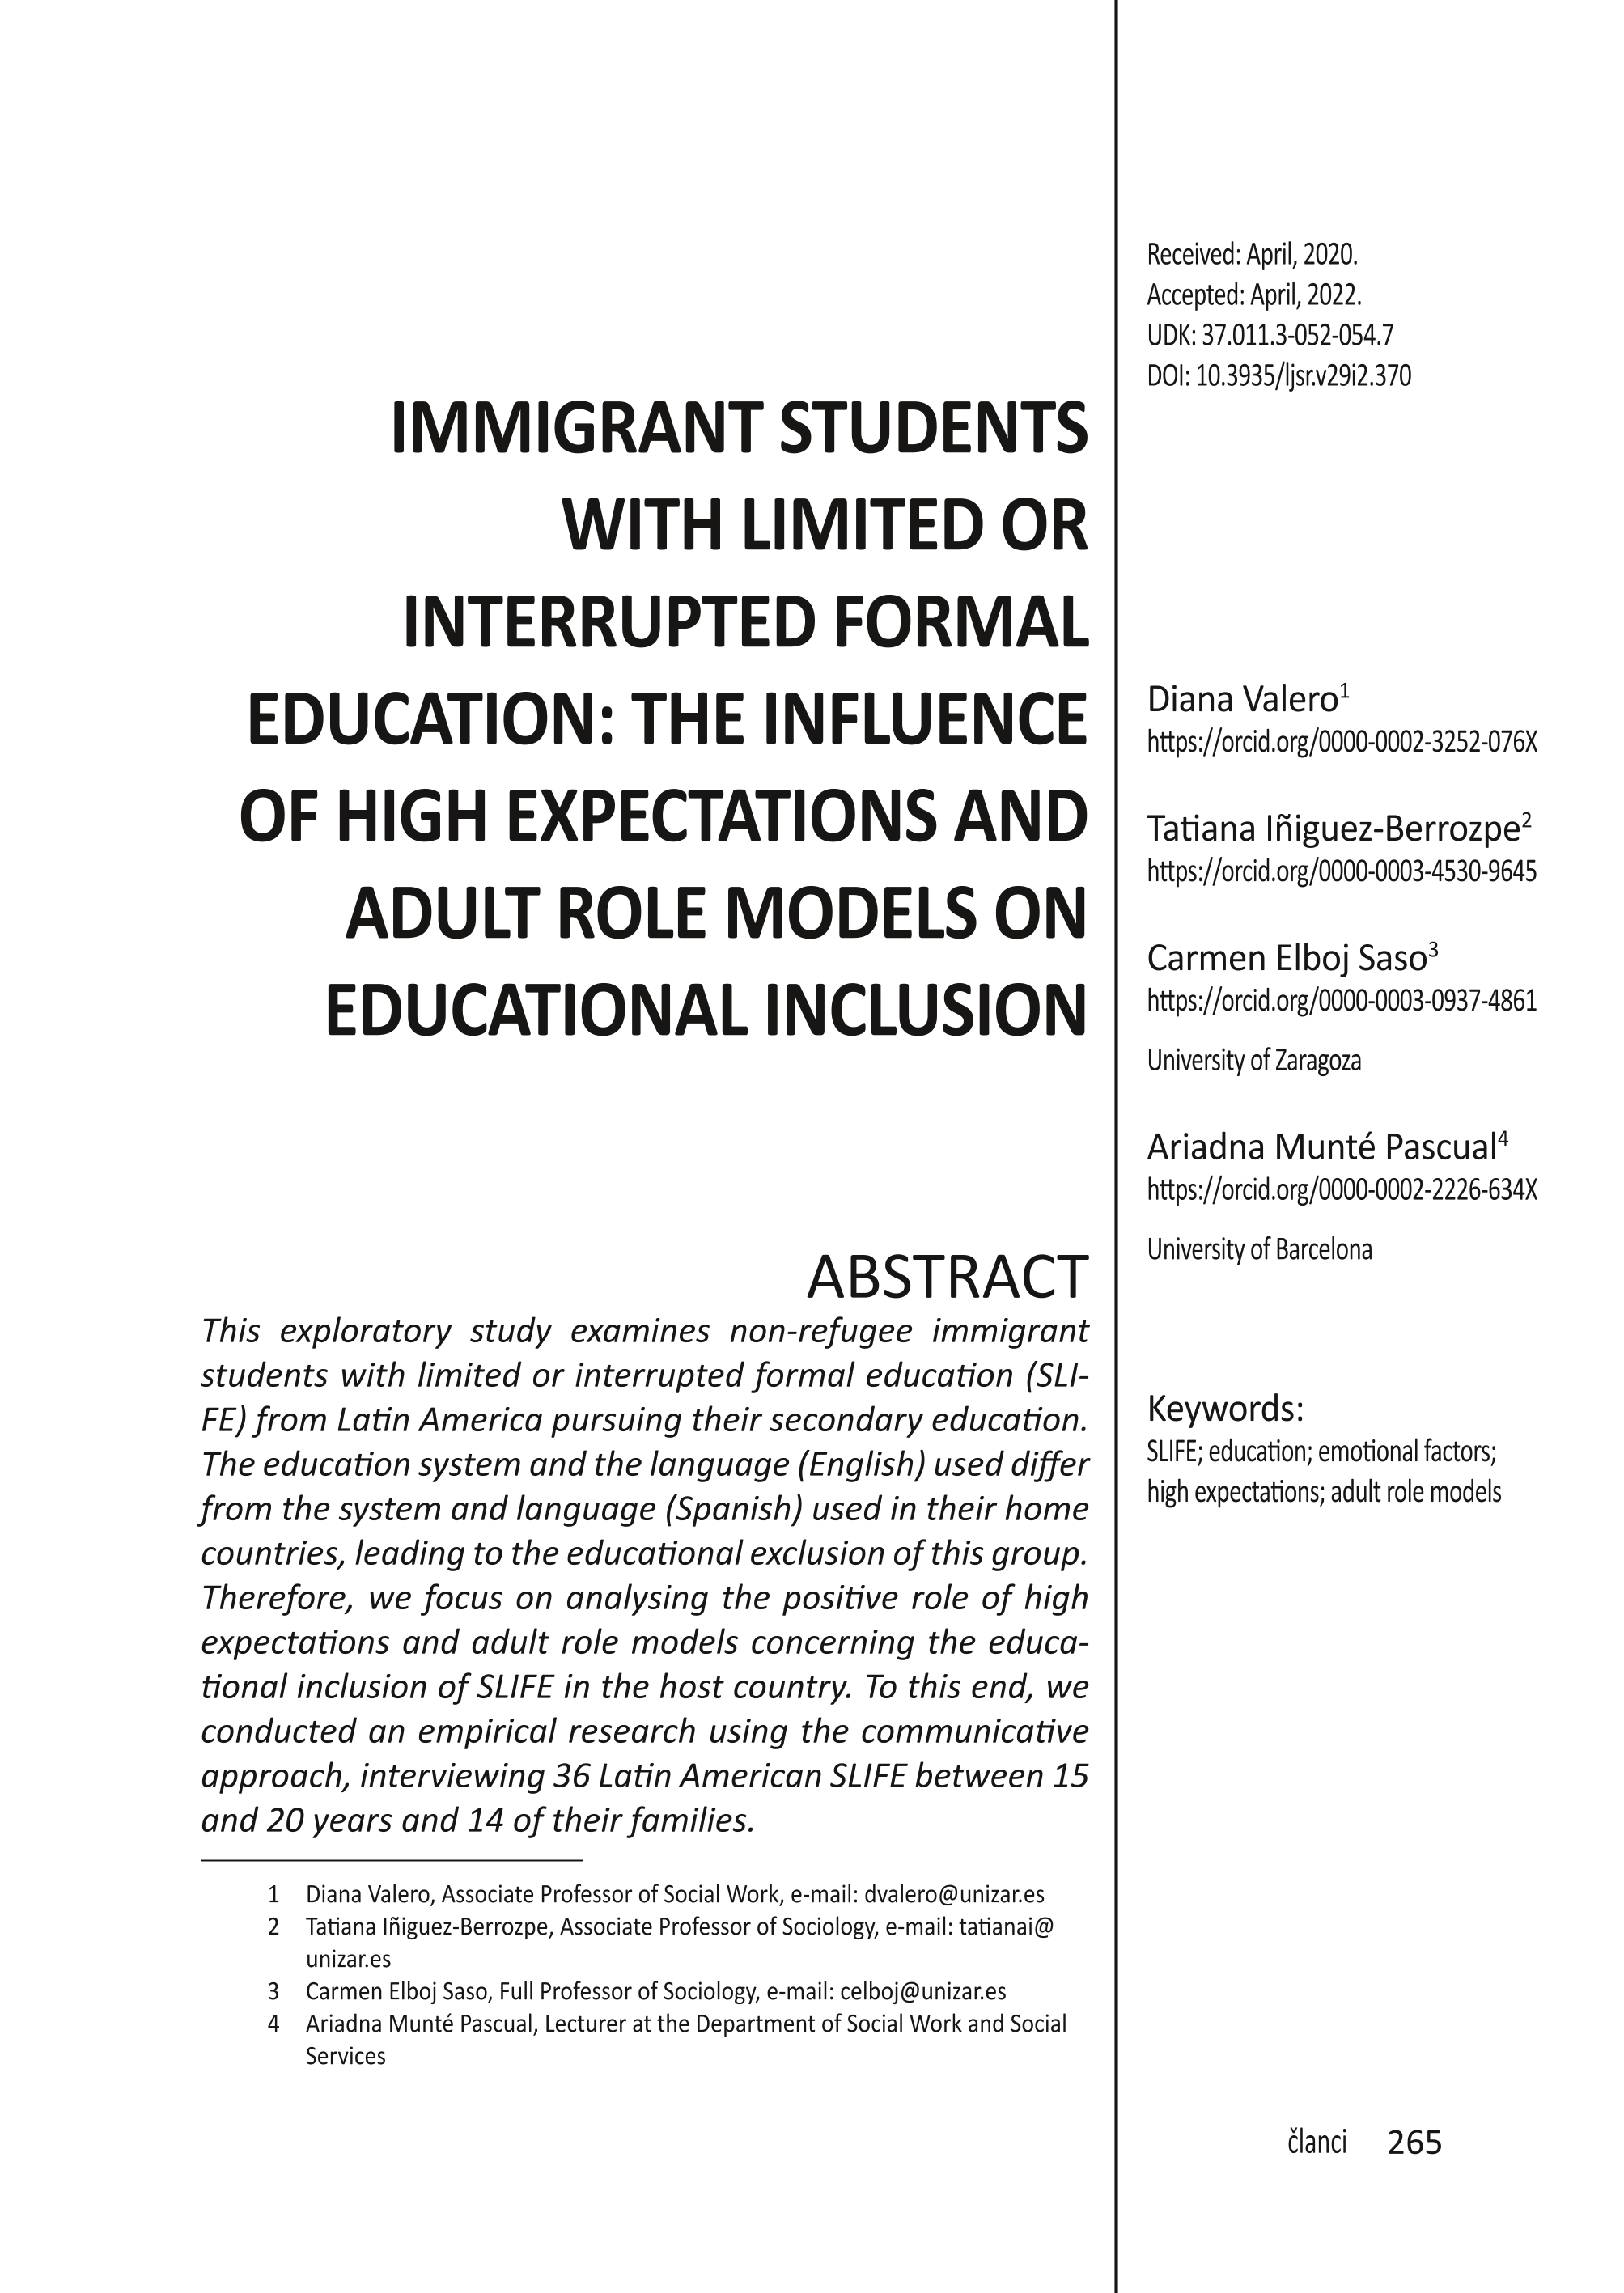 Immigrant students with limited or interrupted formal education: the influence of high expectations and adult role models on educational inclusion